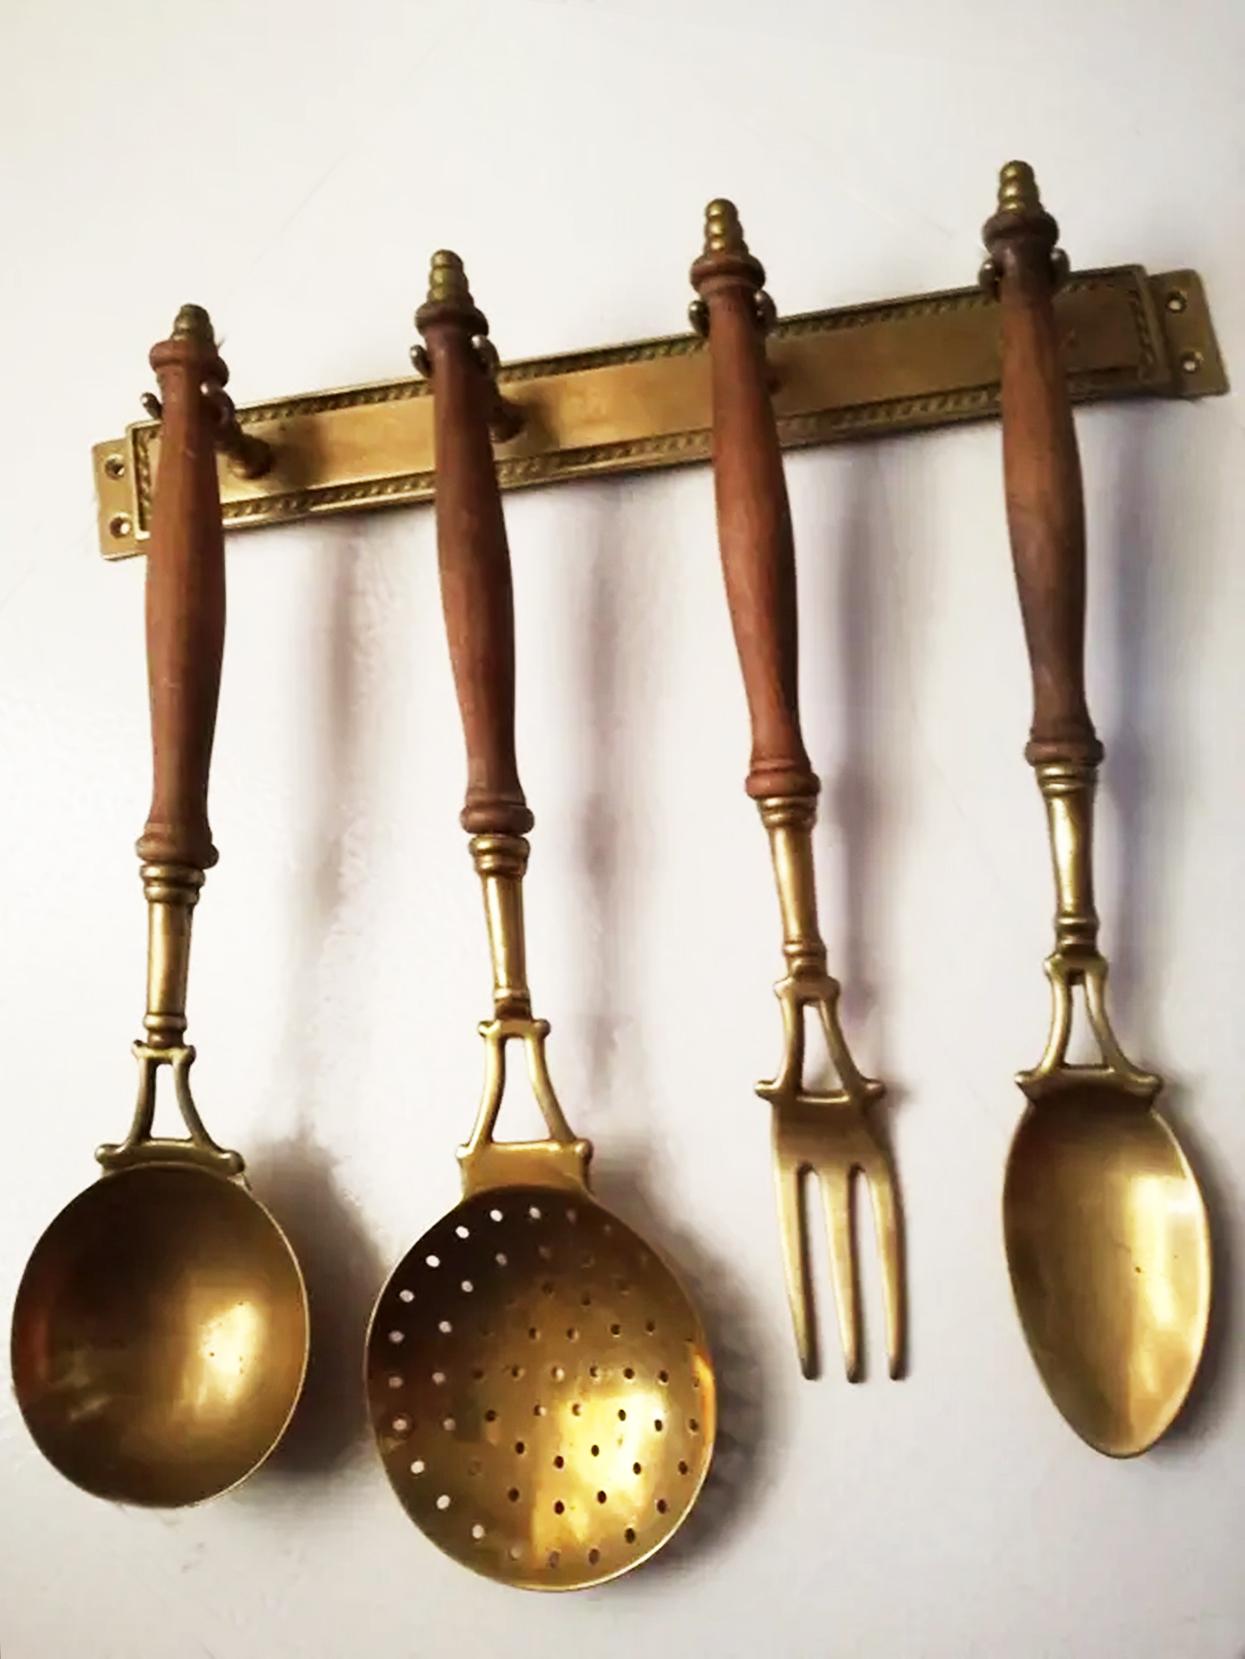 Old Kitchen Utensils Made of Brass with Hanging Bar, Early 20th Century 2